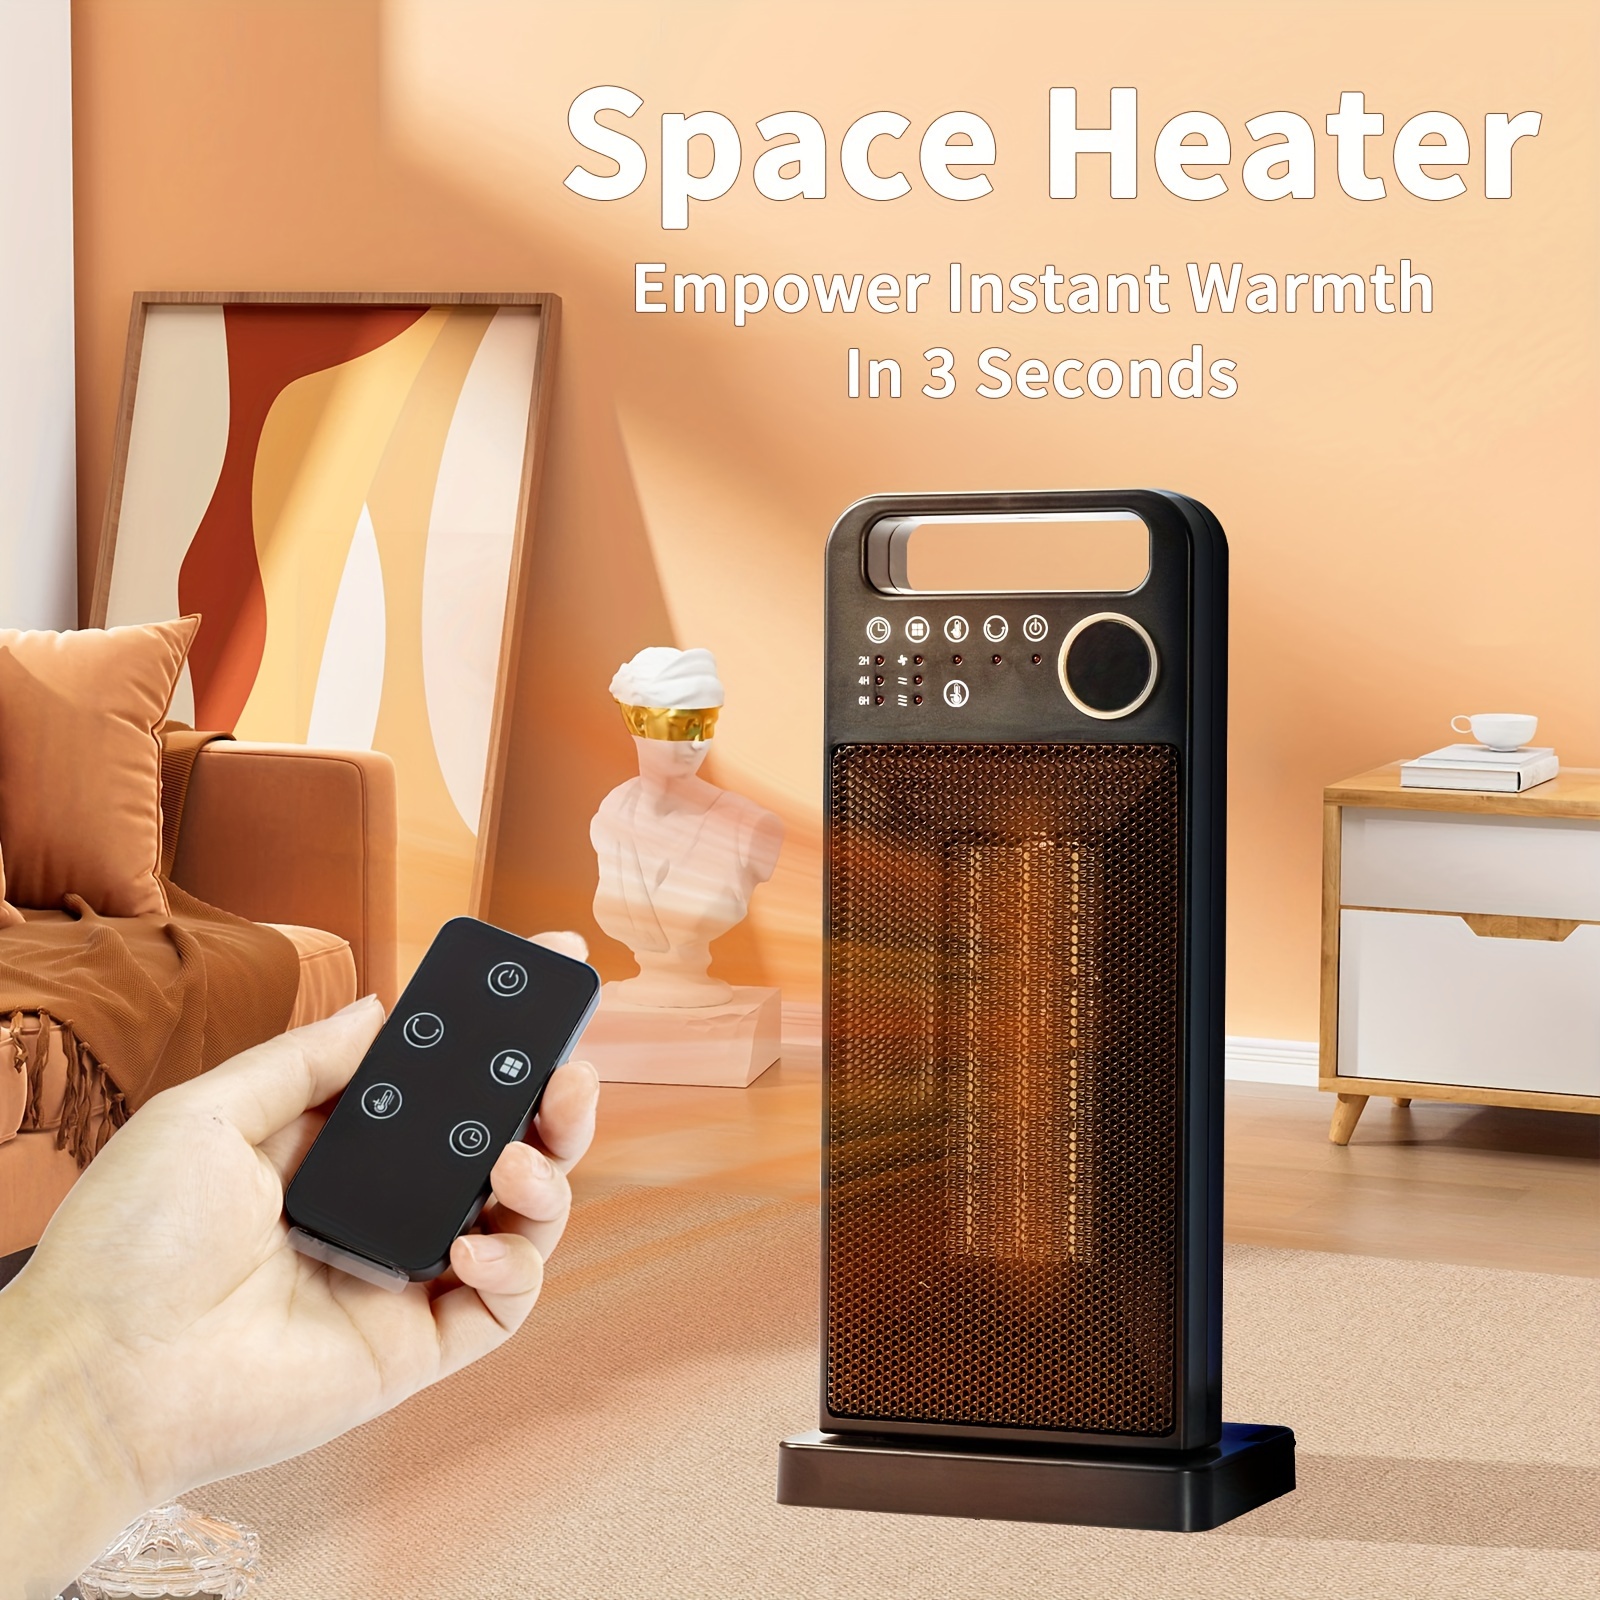 Recommend a battery powered lp space heater : r/Tools